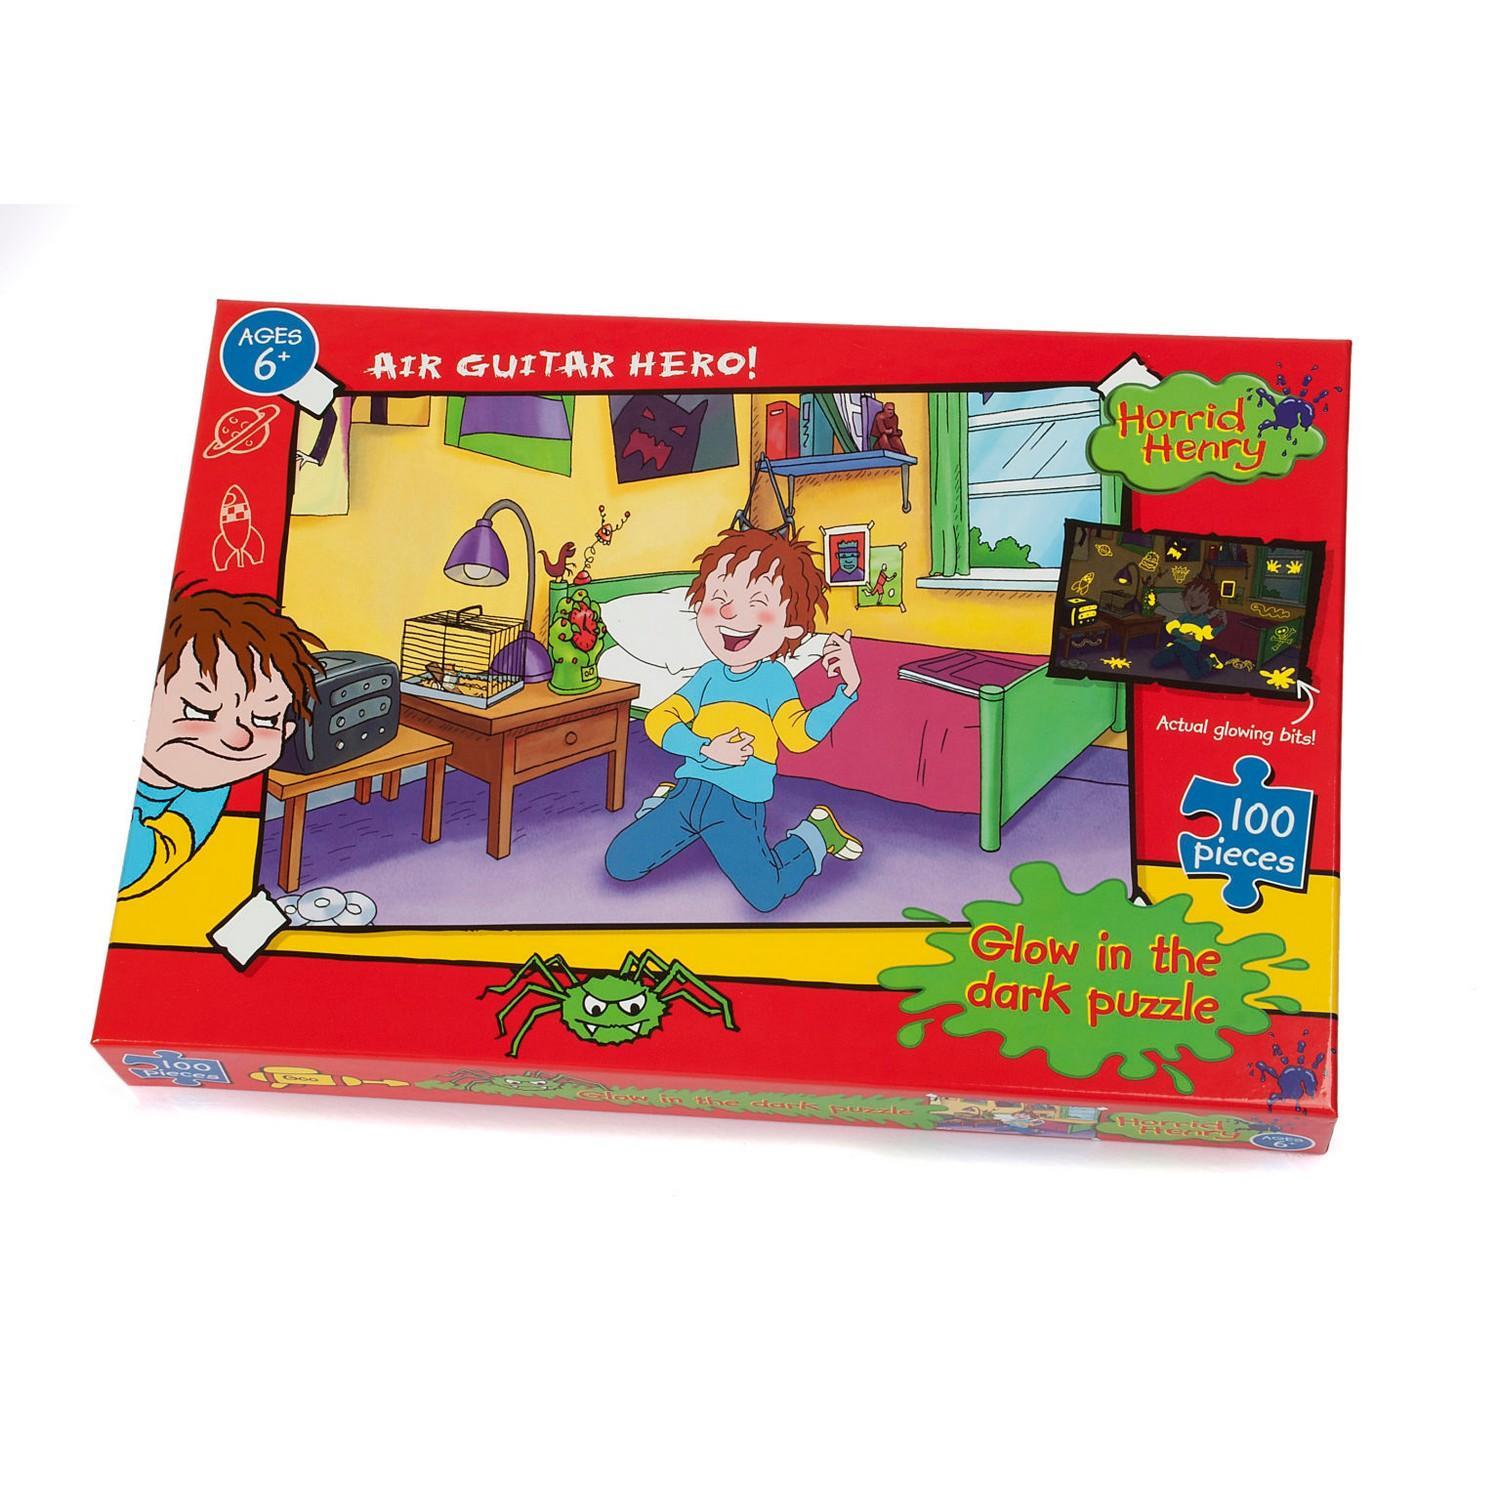 Horrid Henry Air Guitar Jigsaw Puzzle (Multicoloured) (One Size)